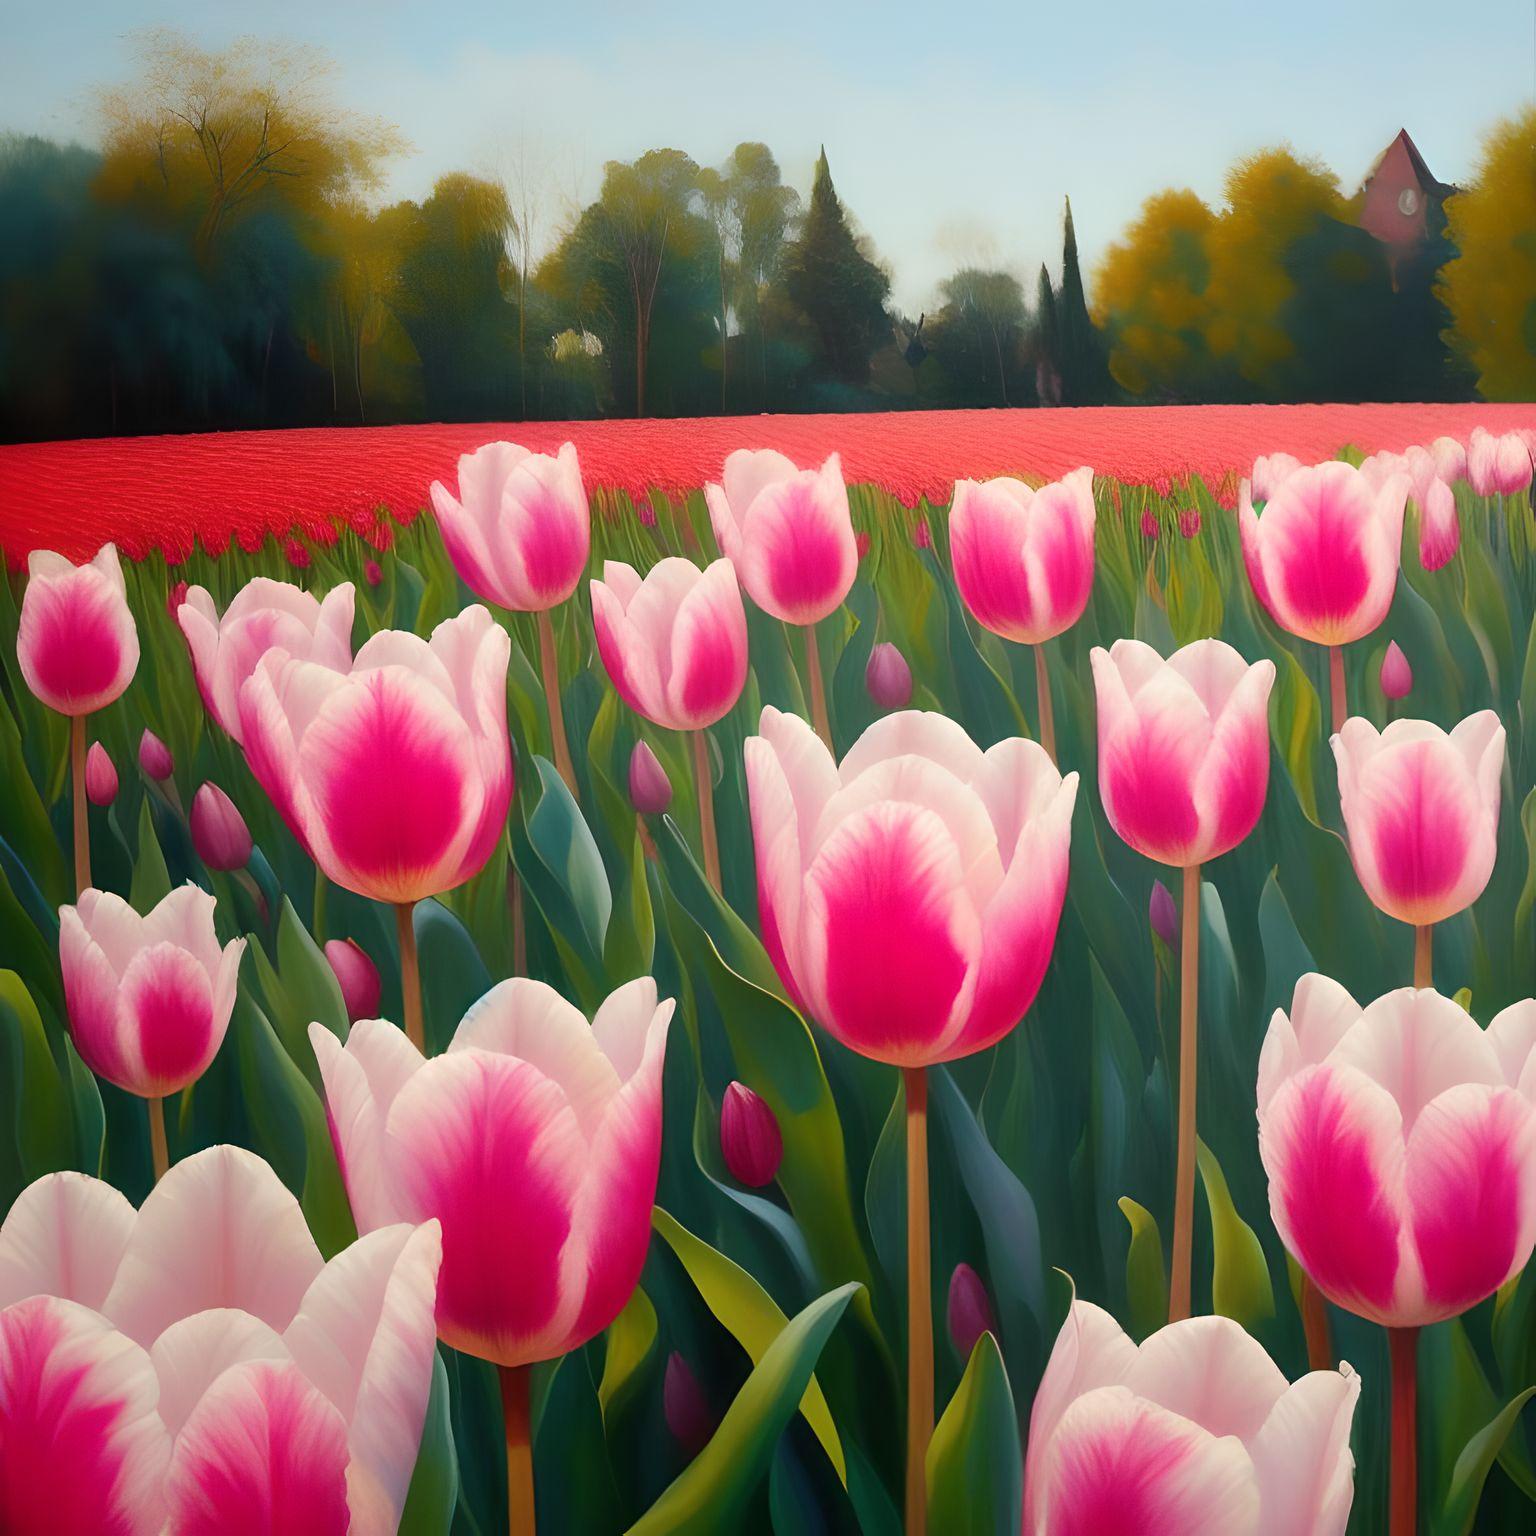 An oil painting of a group of pink tulips in the garden